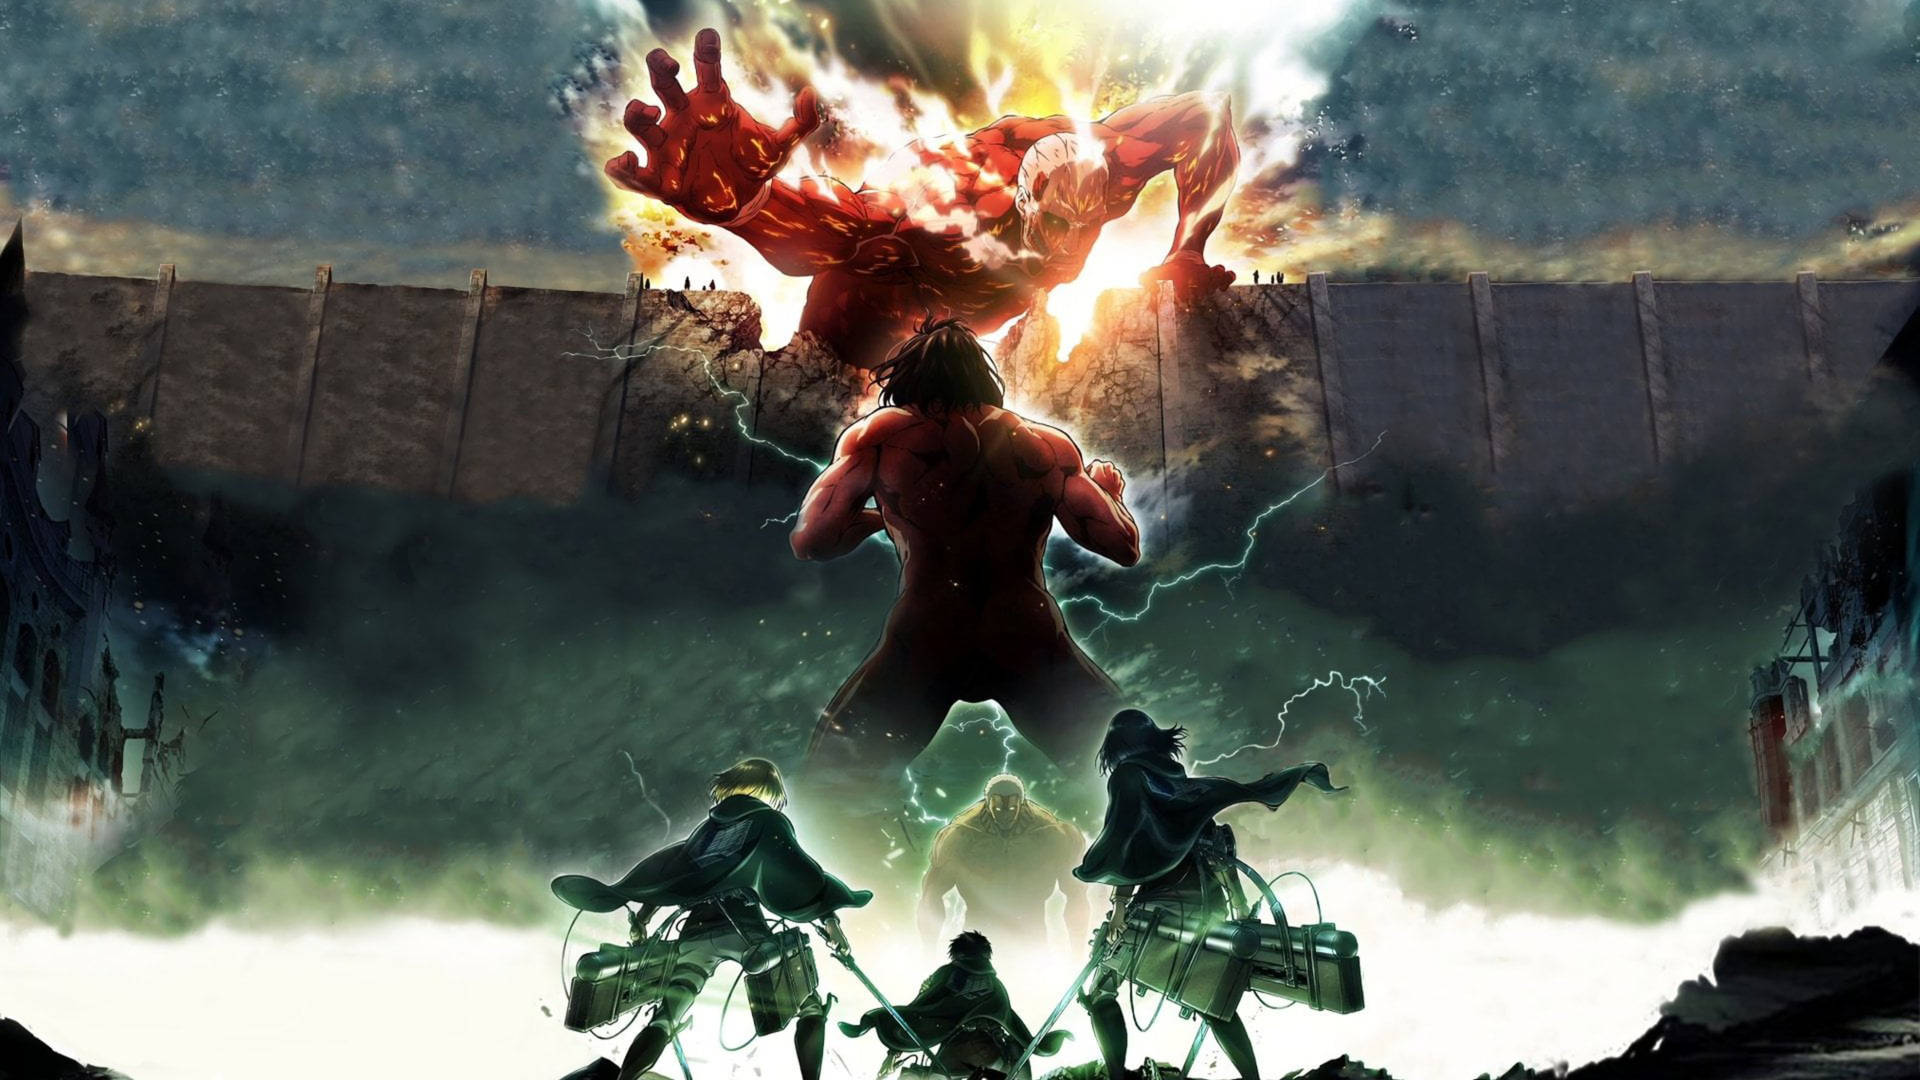 Aot Titan Breaking The Wall Background